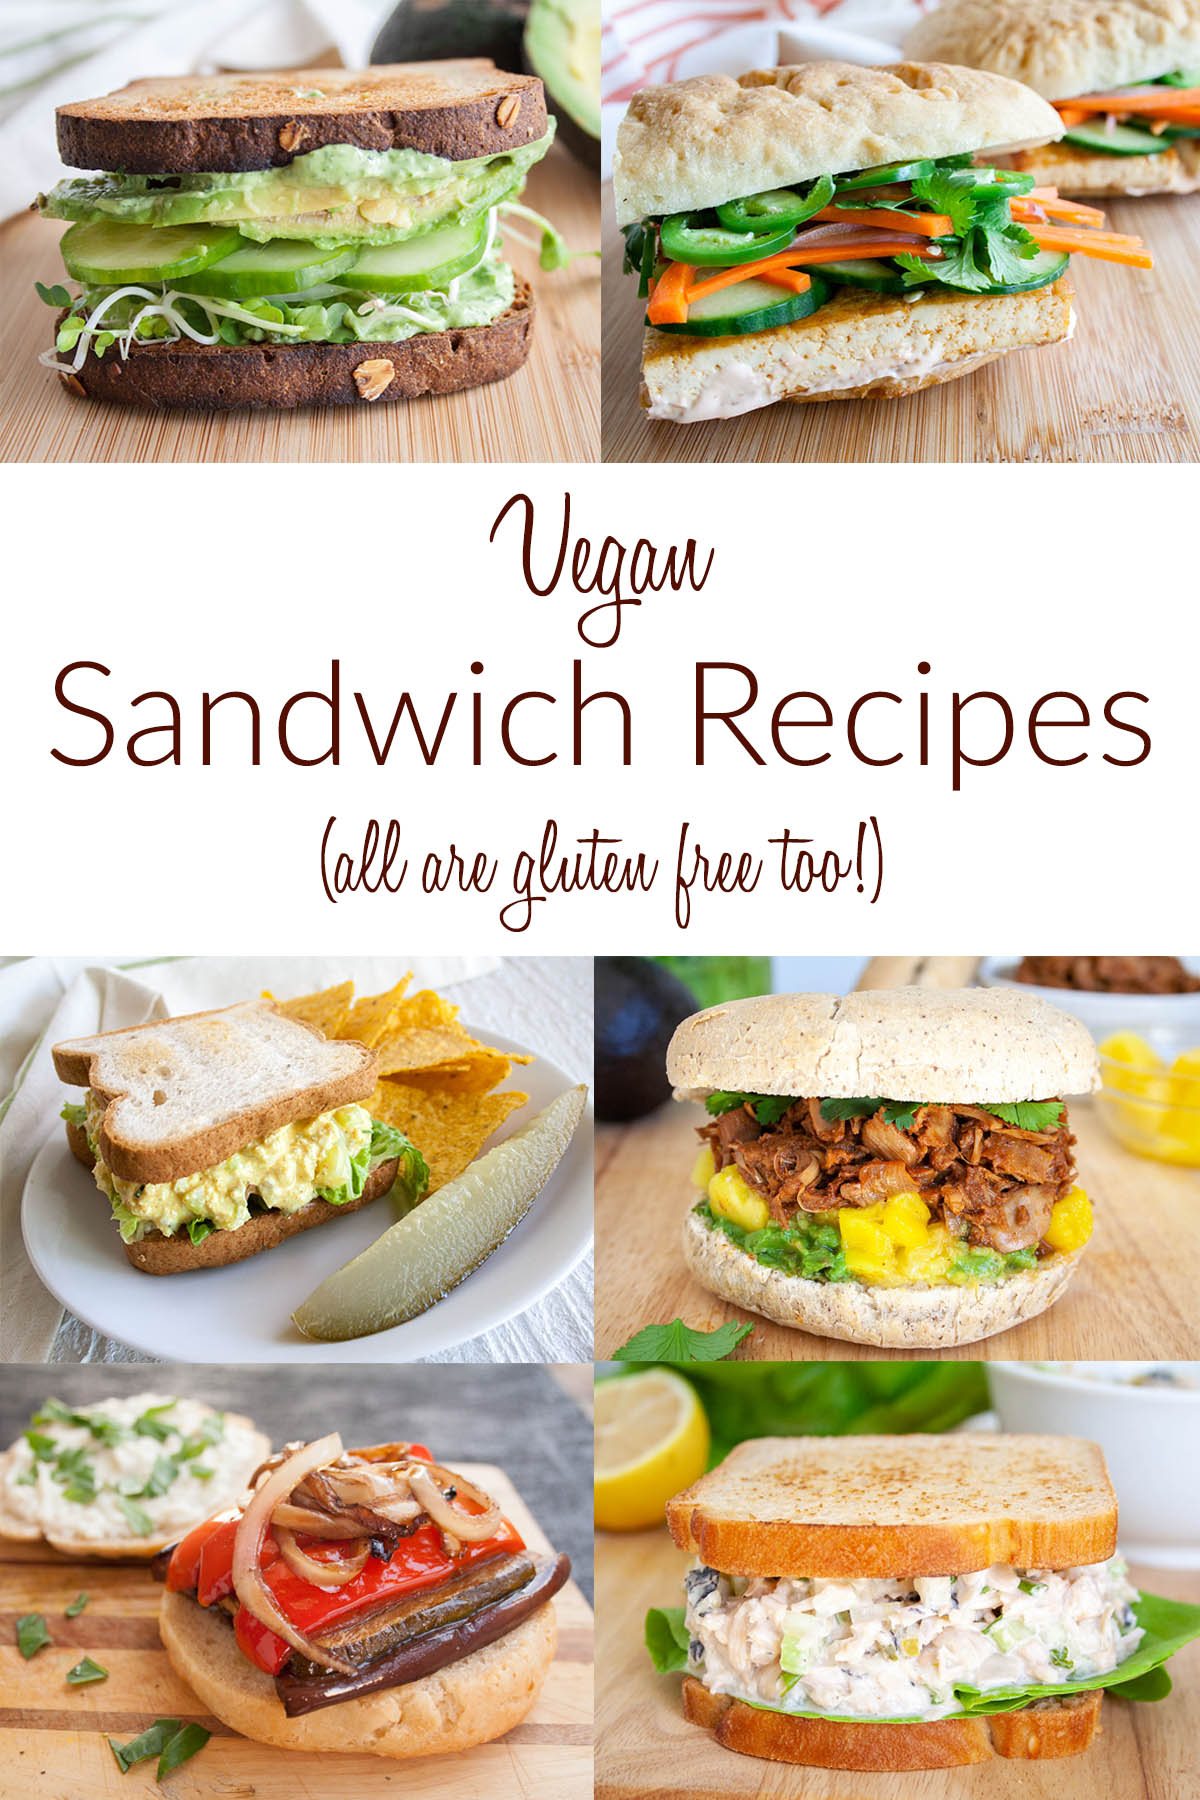 "Vegan Sandwich Recipes" written on collage photo with 6 sandwiches.